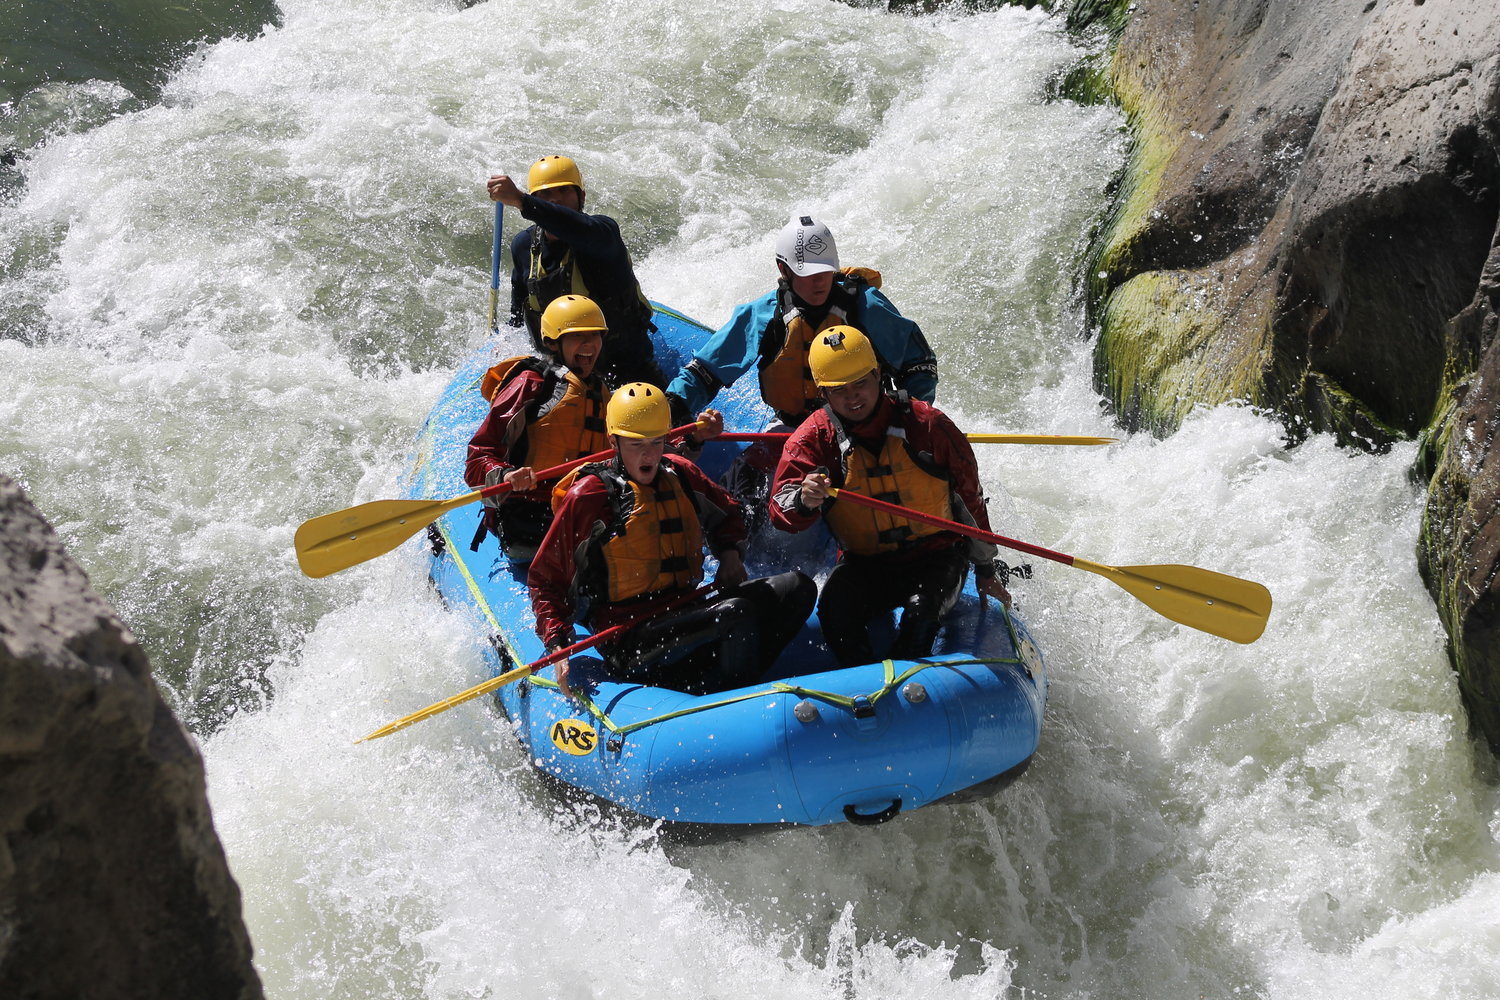 Rafting in the Chili River by Le Foyer Tours